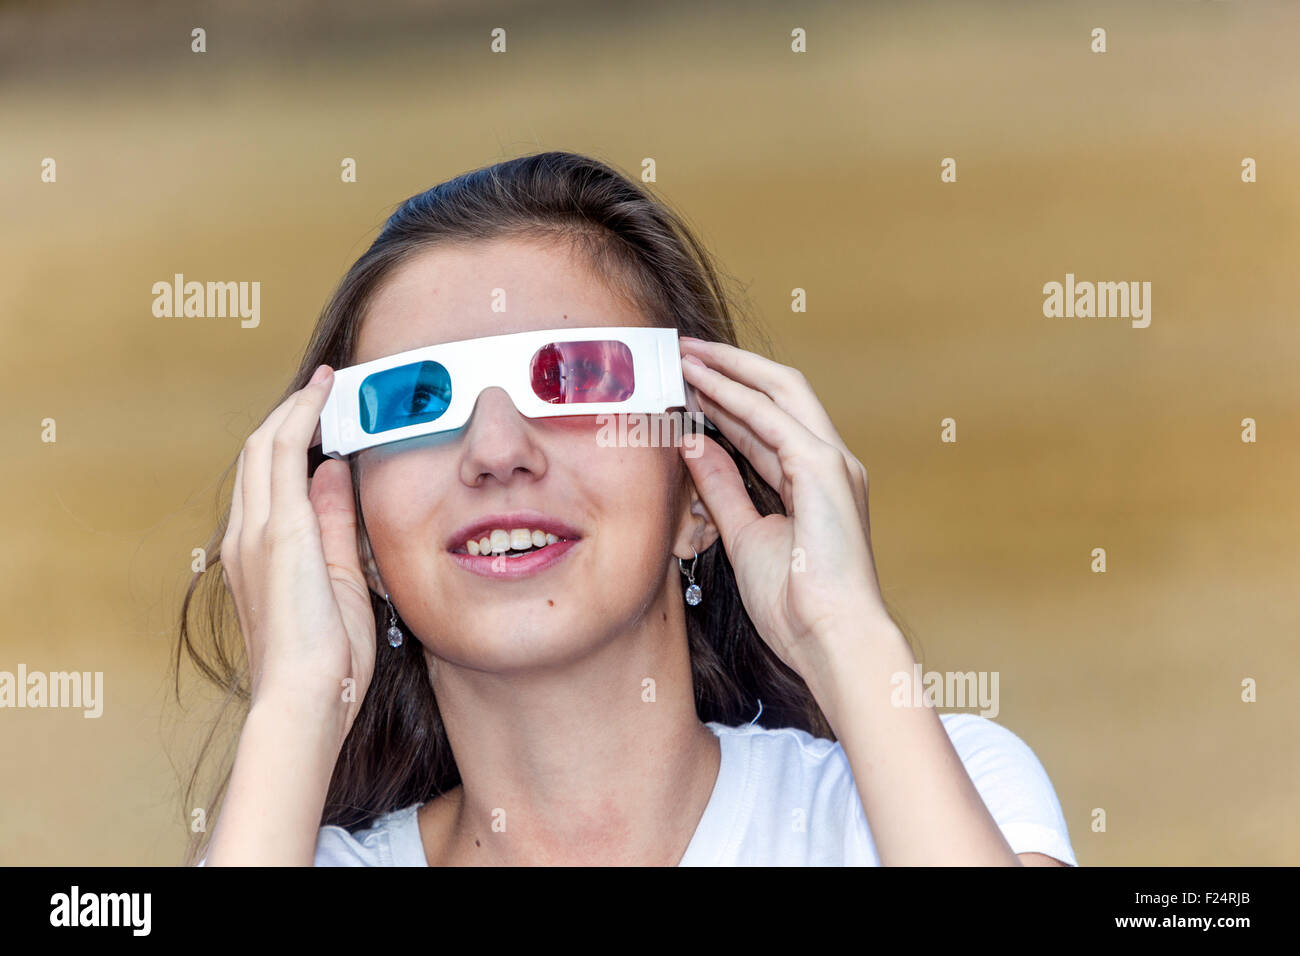 Young girl with 3D glasses Stock Photo